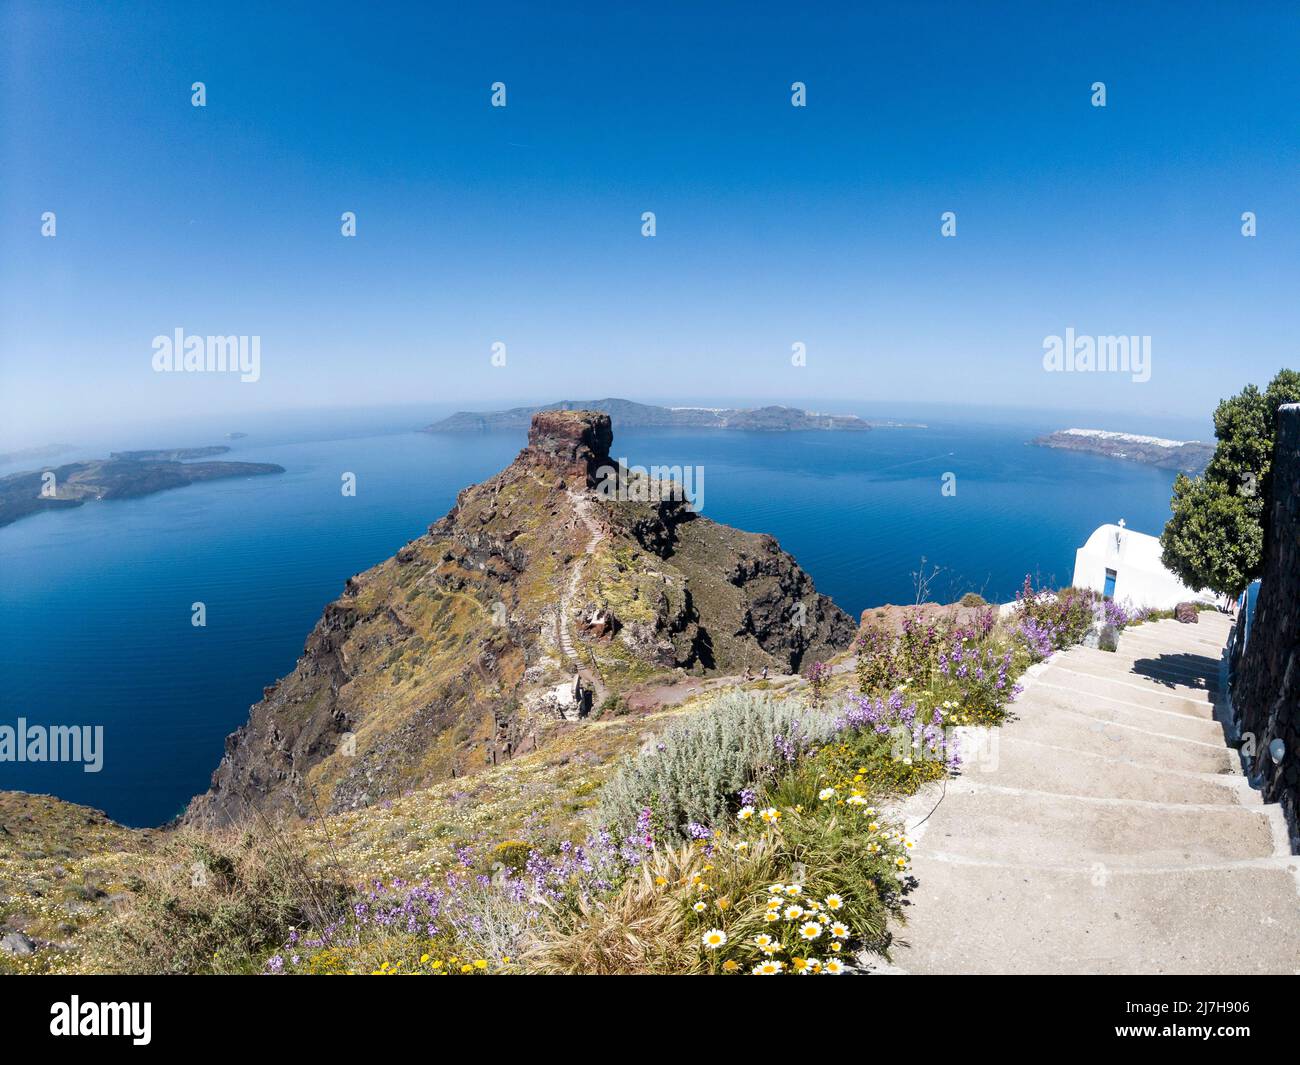 Beautiful view of the rock hill of Skaros, in Santorini island, Greece, and sea view of the volcanic part of Santorini and the legendary Caldera. Stock Photo